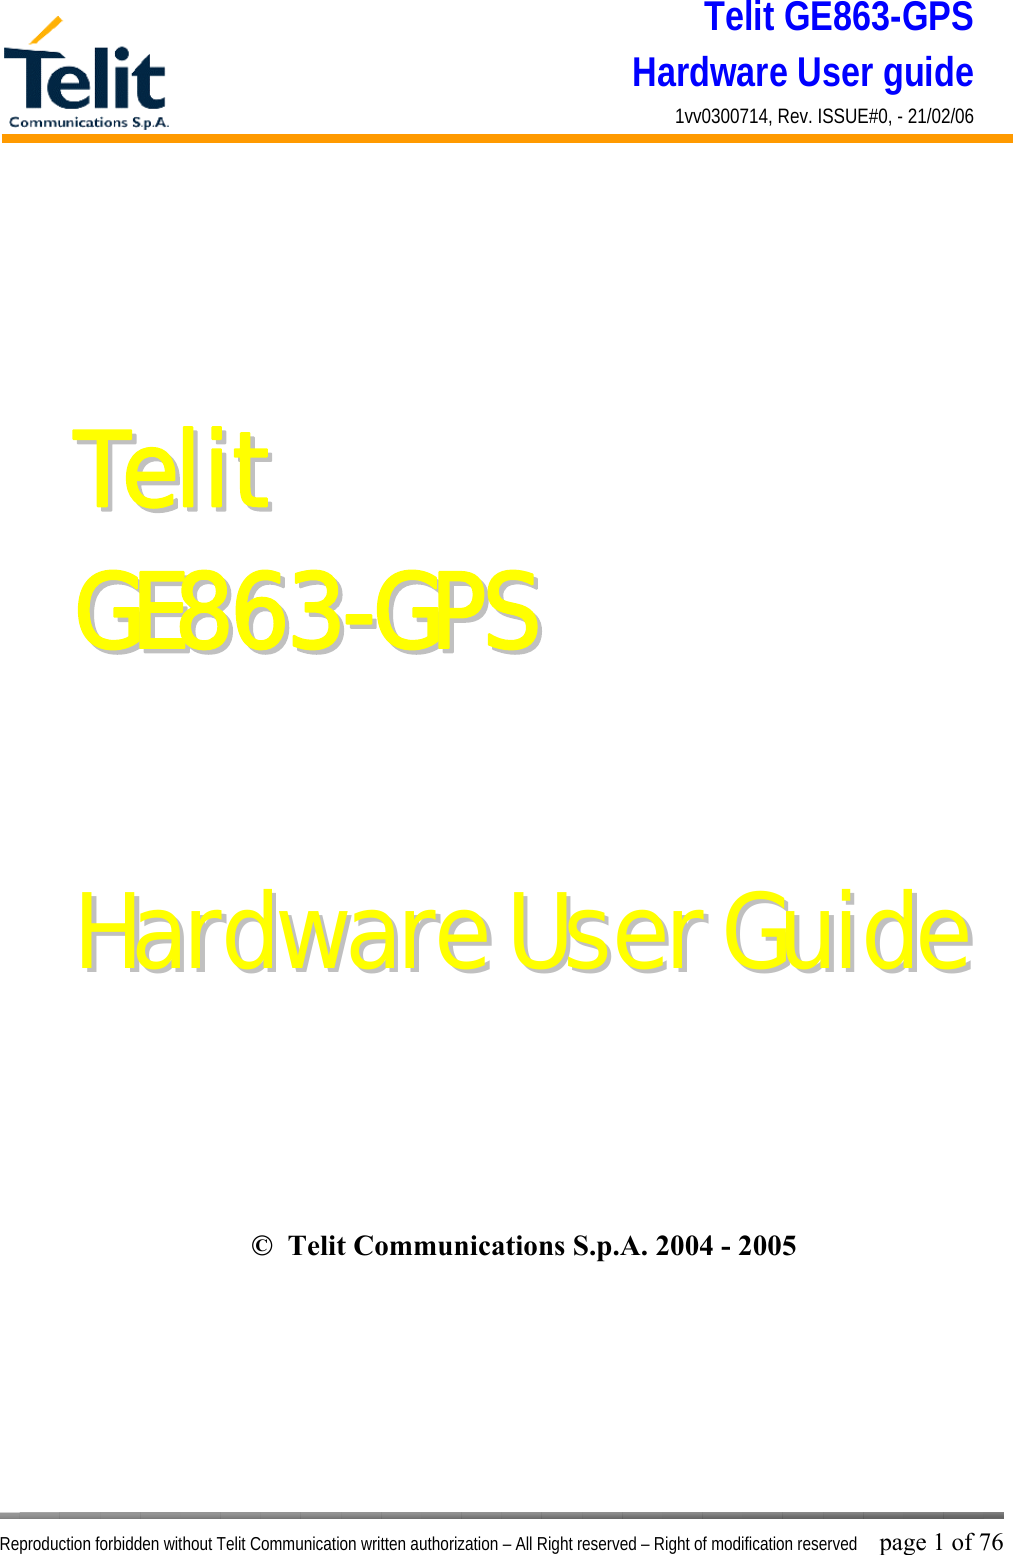 Telit GE863-GPS Hardware User guide 1vv0300714, Rev. ISSUE#0, - 21/02/06    Reproduction forbidden without Telit Communication written authorization – All Right reserved – Right of modification reserved page 1 of 76 TTeelliitt  GGEE886633--GGPPSS      HHaarrddwwaarree  UUsseerr  GGuuiiddee ©  Telit Communications S.p.A. 2004 - 2005  